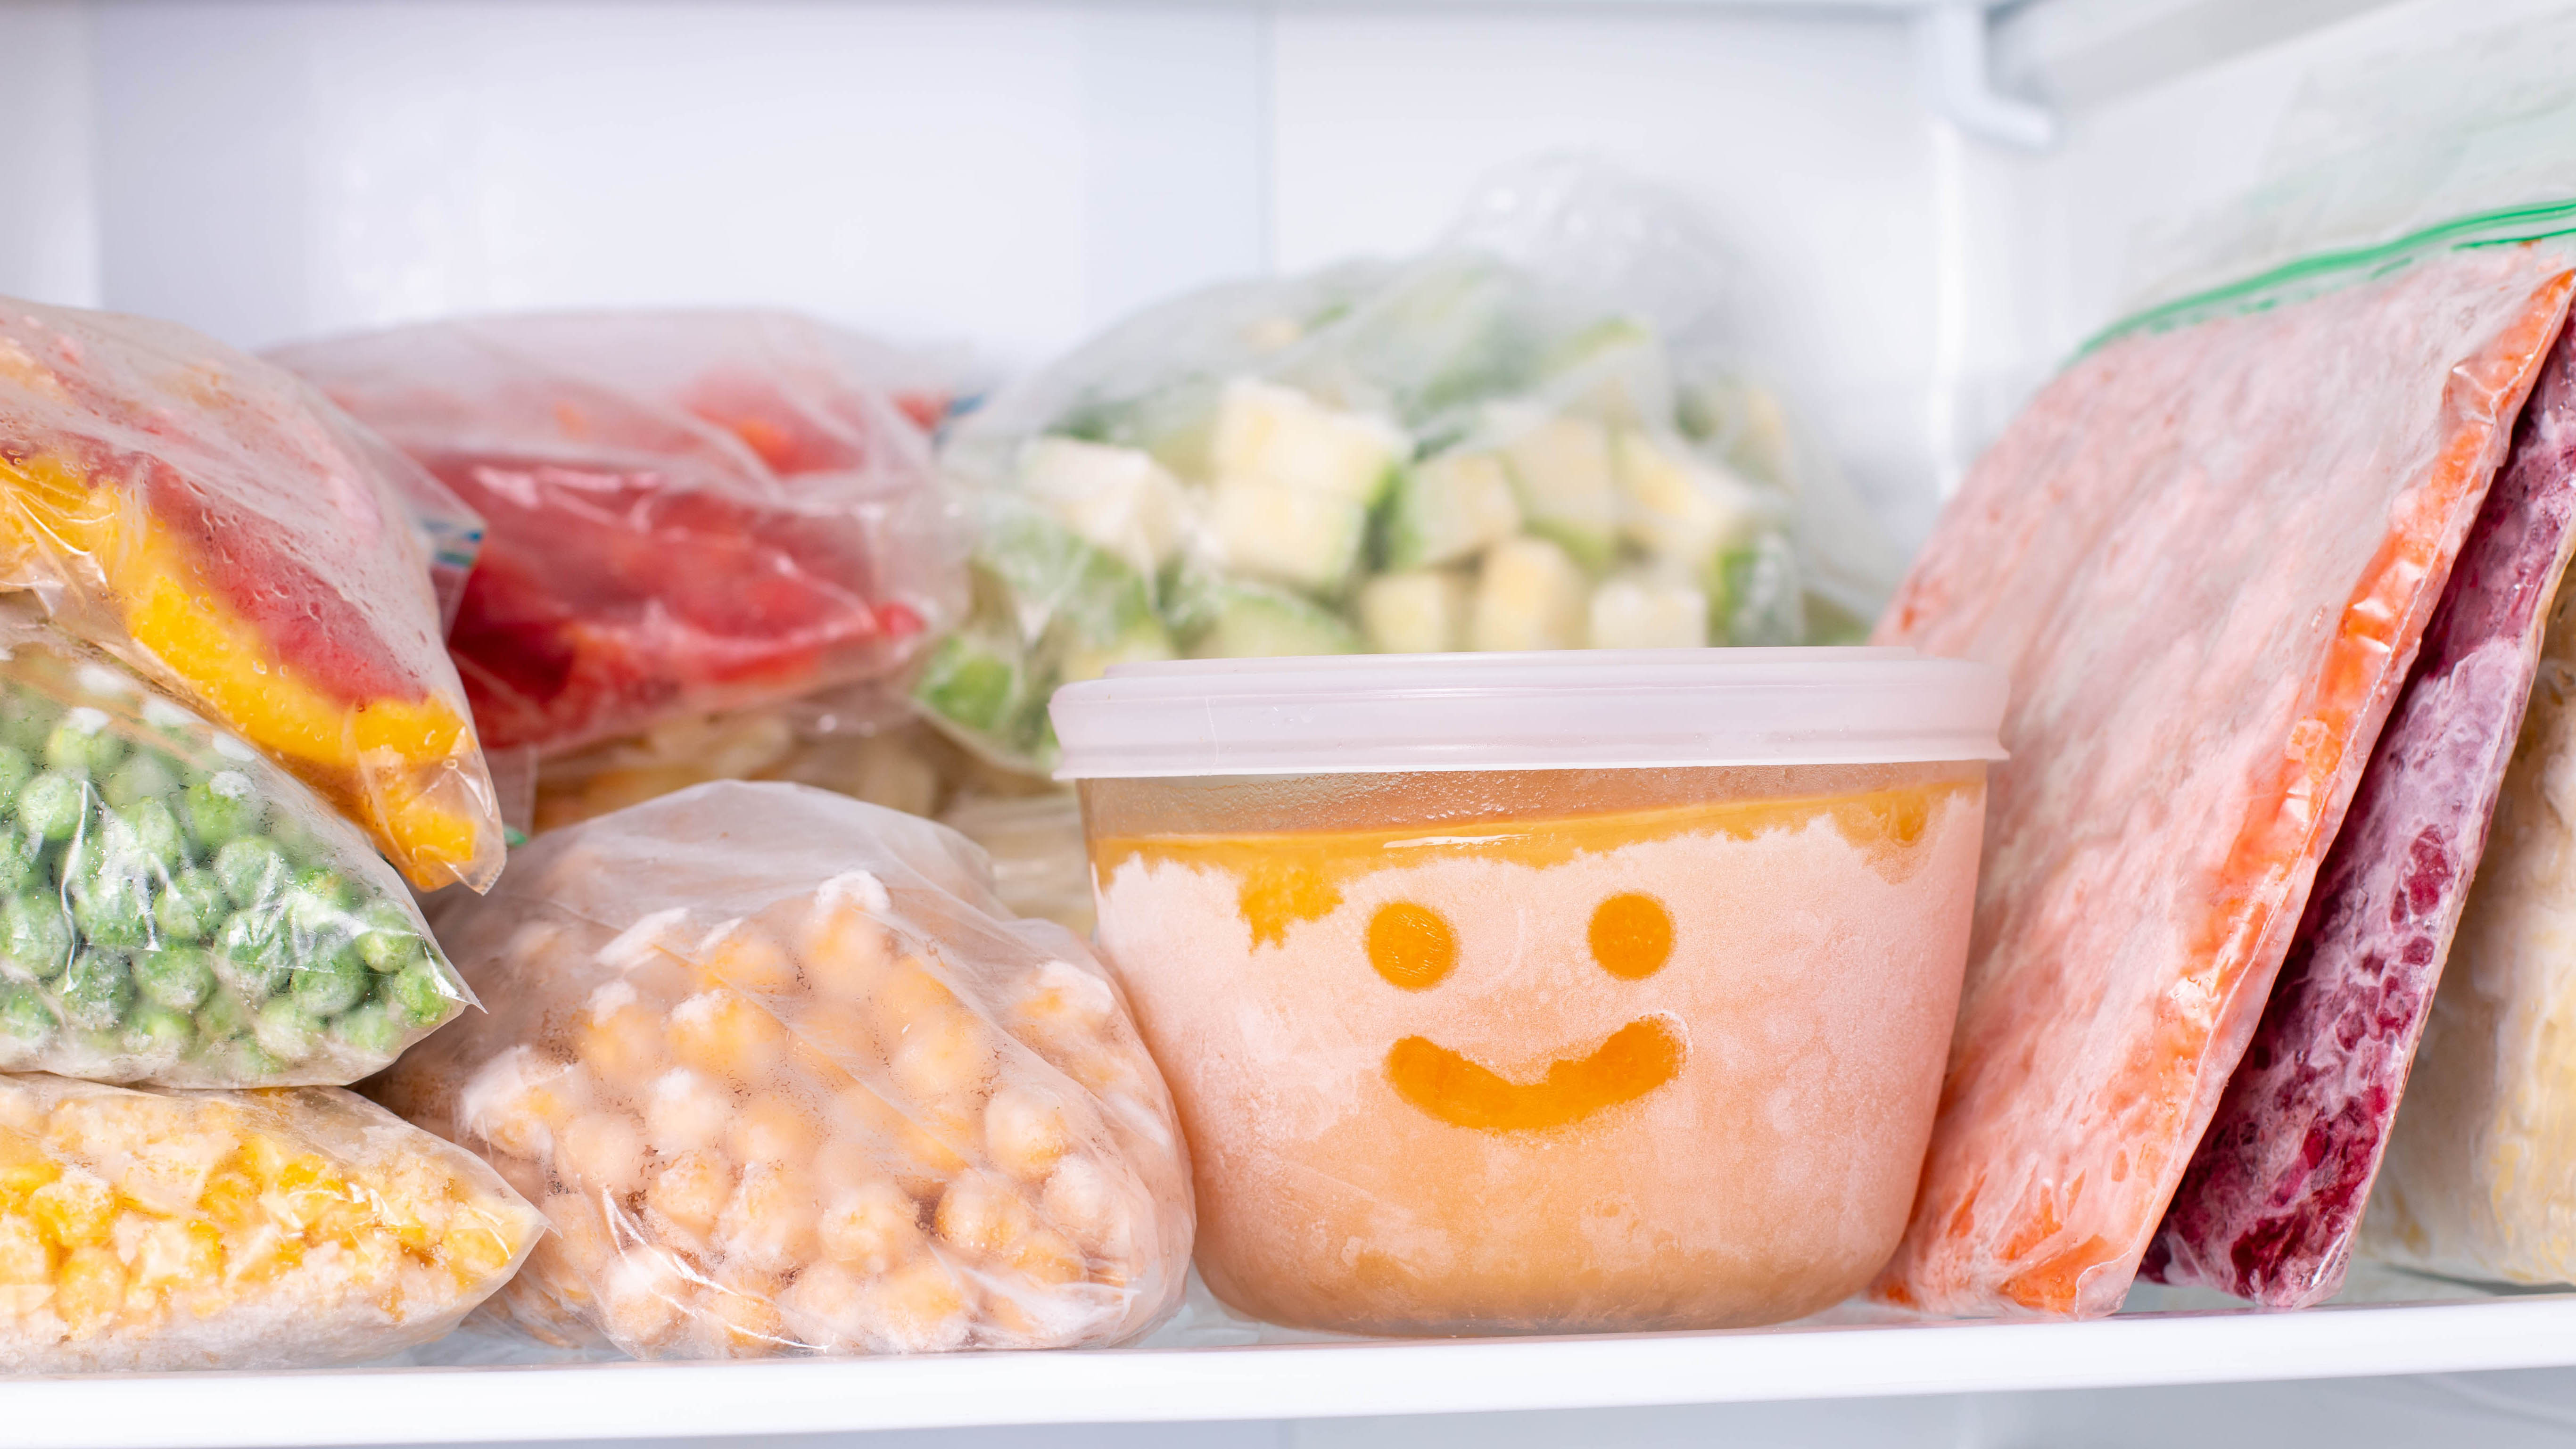 A freezer rack full of food and a smiley face painted on one container